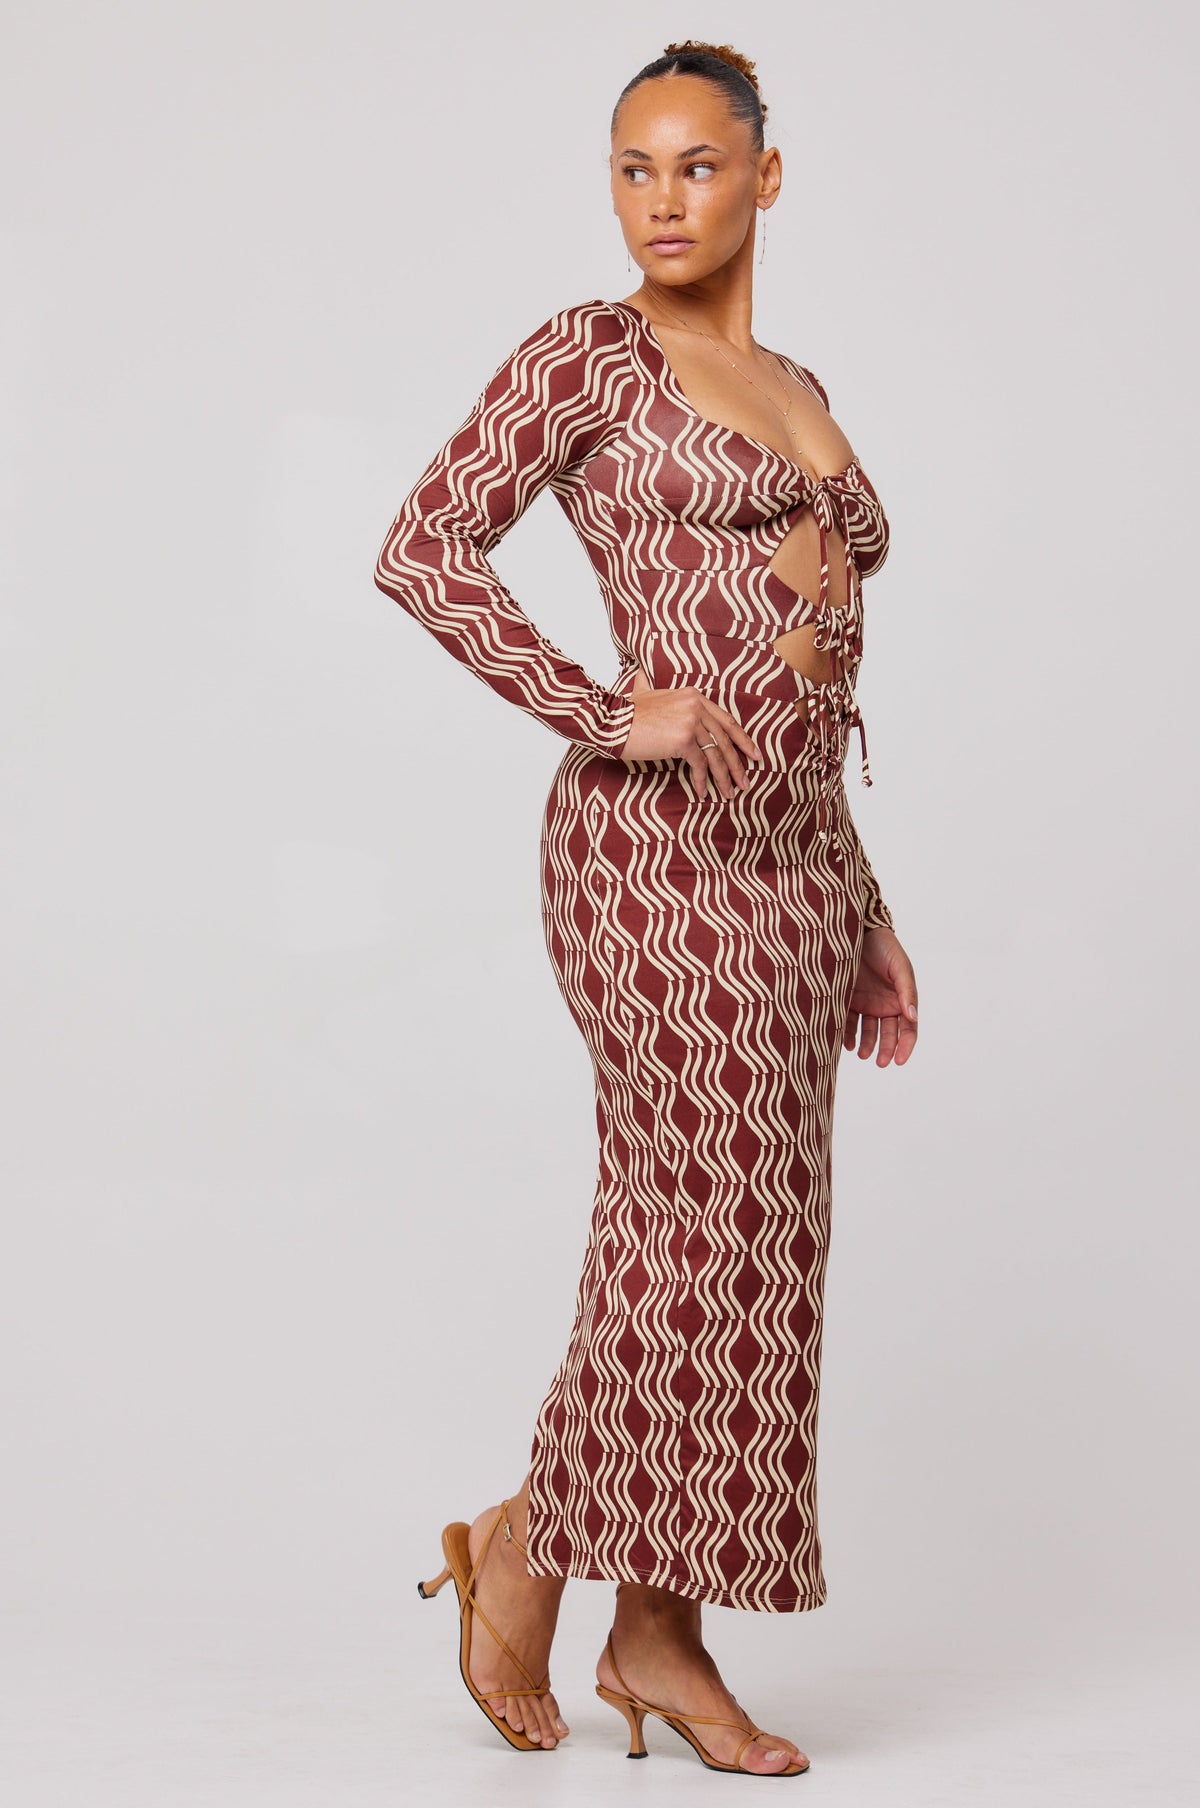 This is an image of Simone Dress in Coco - RESA featuring a model wearing the dress